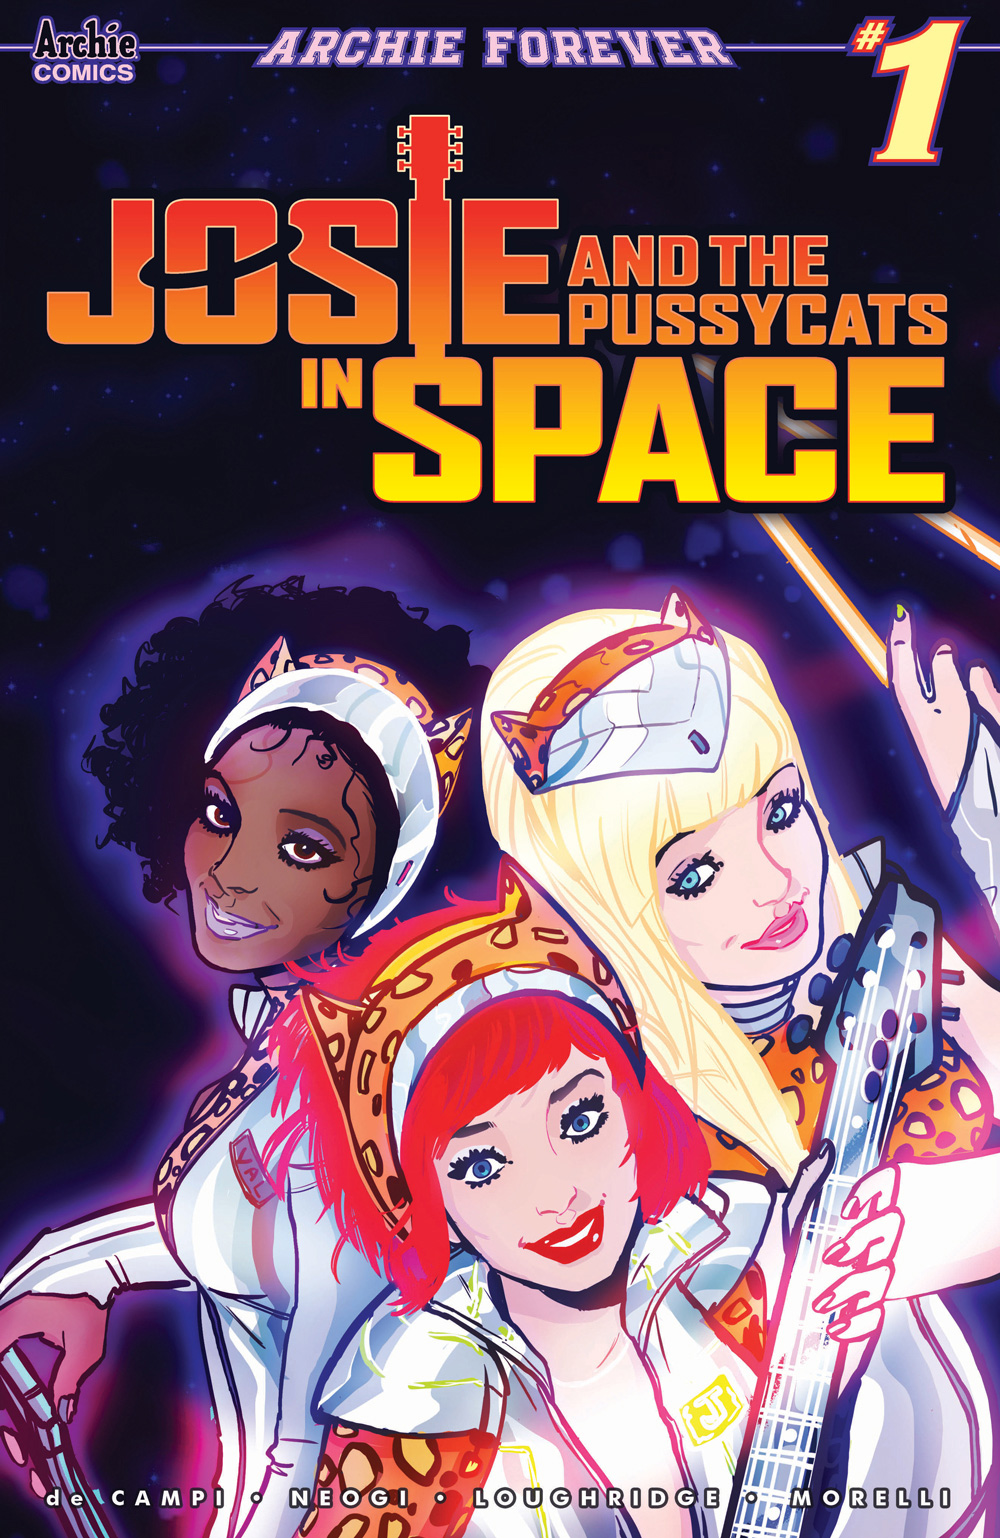 JOSIE AND THE PUSSYCATS IN SPACE #1 (of 5) - Archie Comics